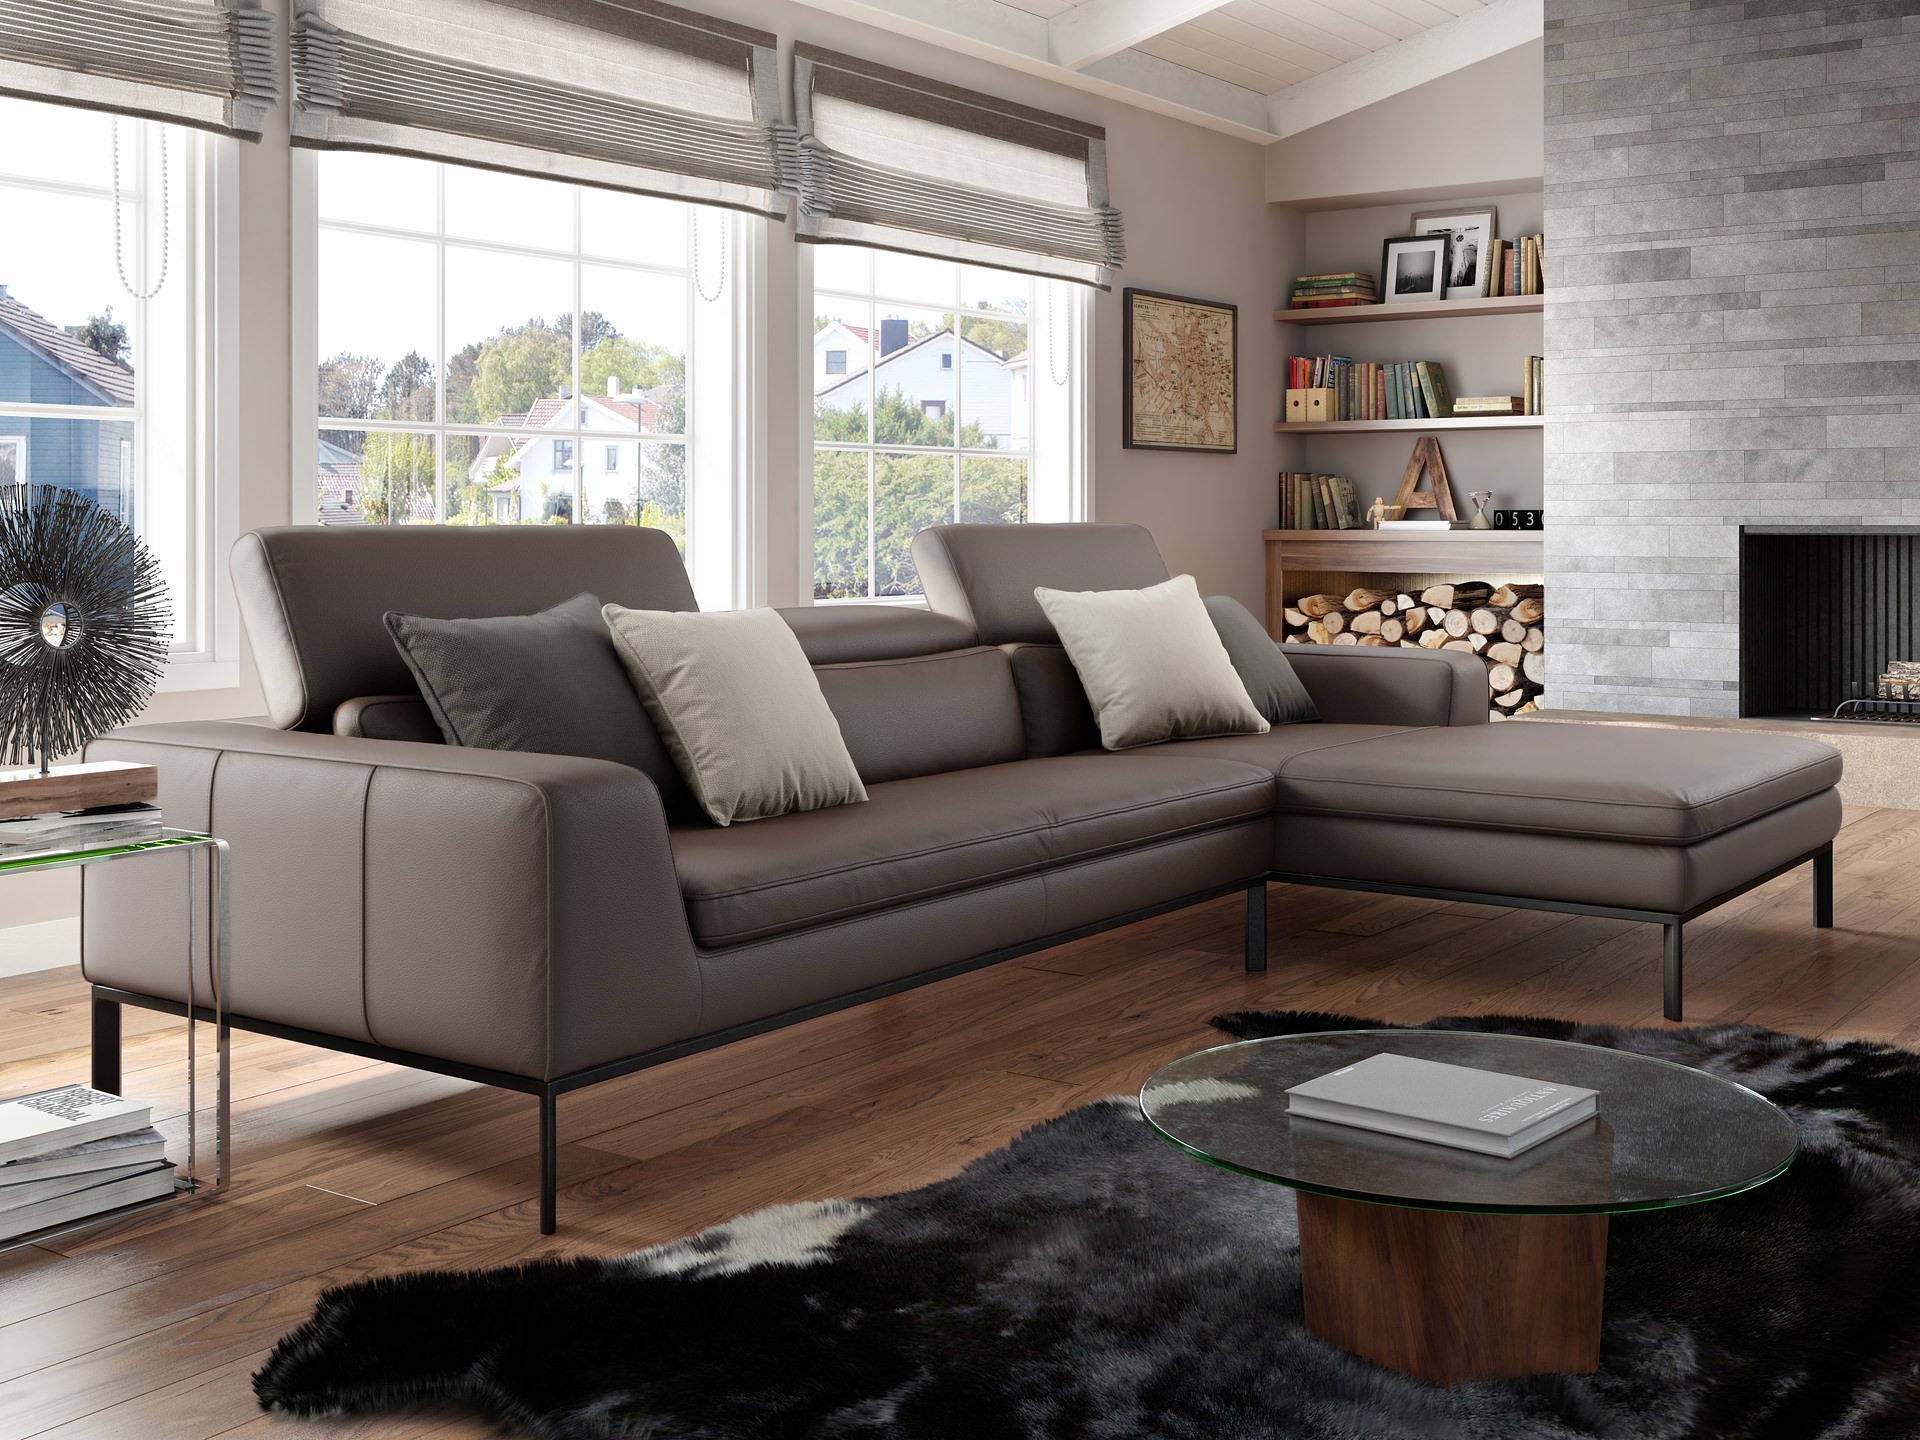 Sofa pictures. Sofa. Mahè | Sectional Sofa by Braid. Peugeot Upholstered Sectional.